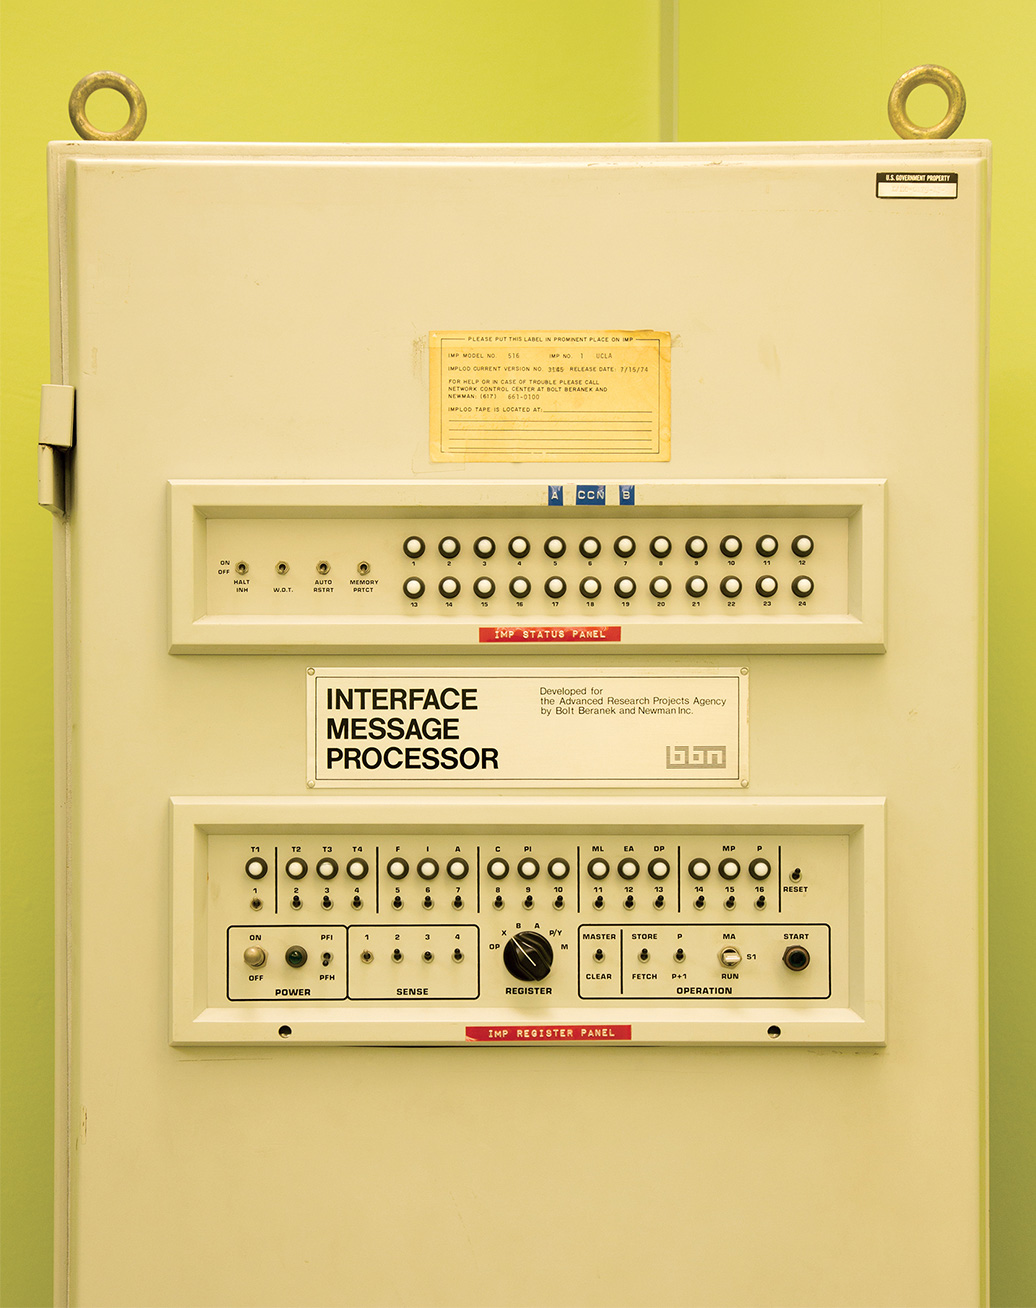 An image of the ARPANET computer network showing its many lights and switches.